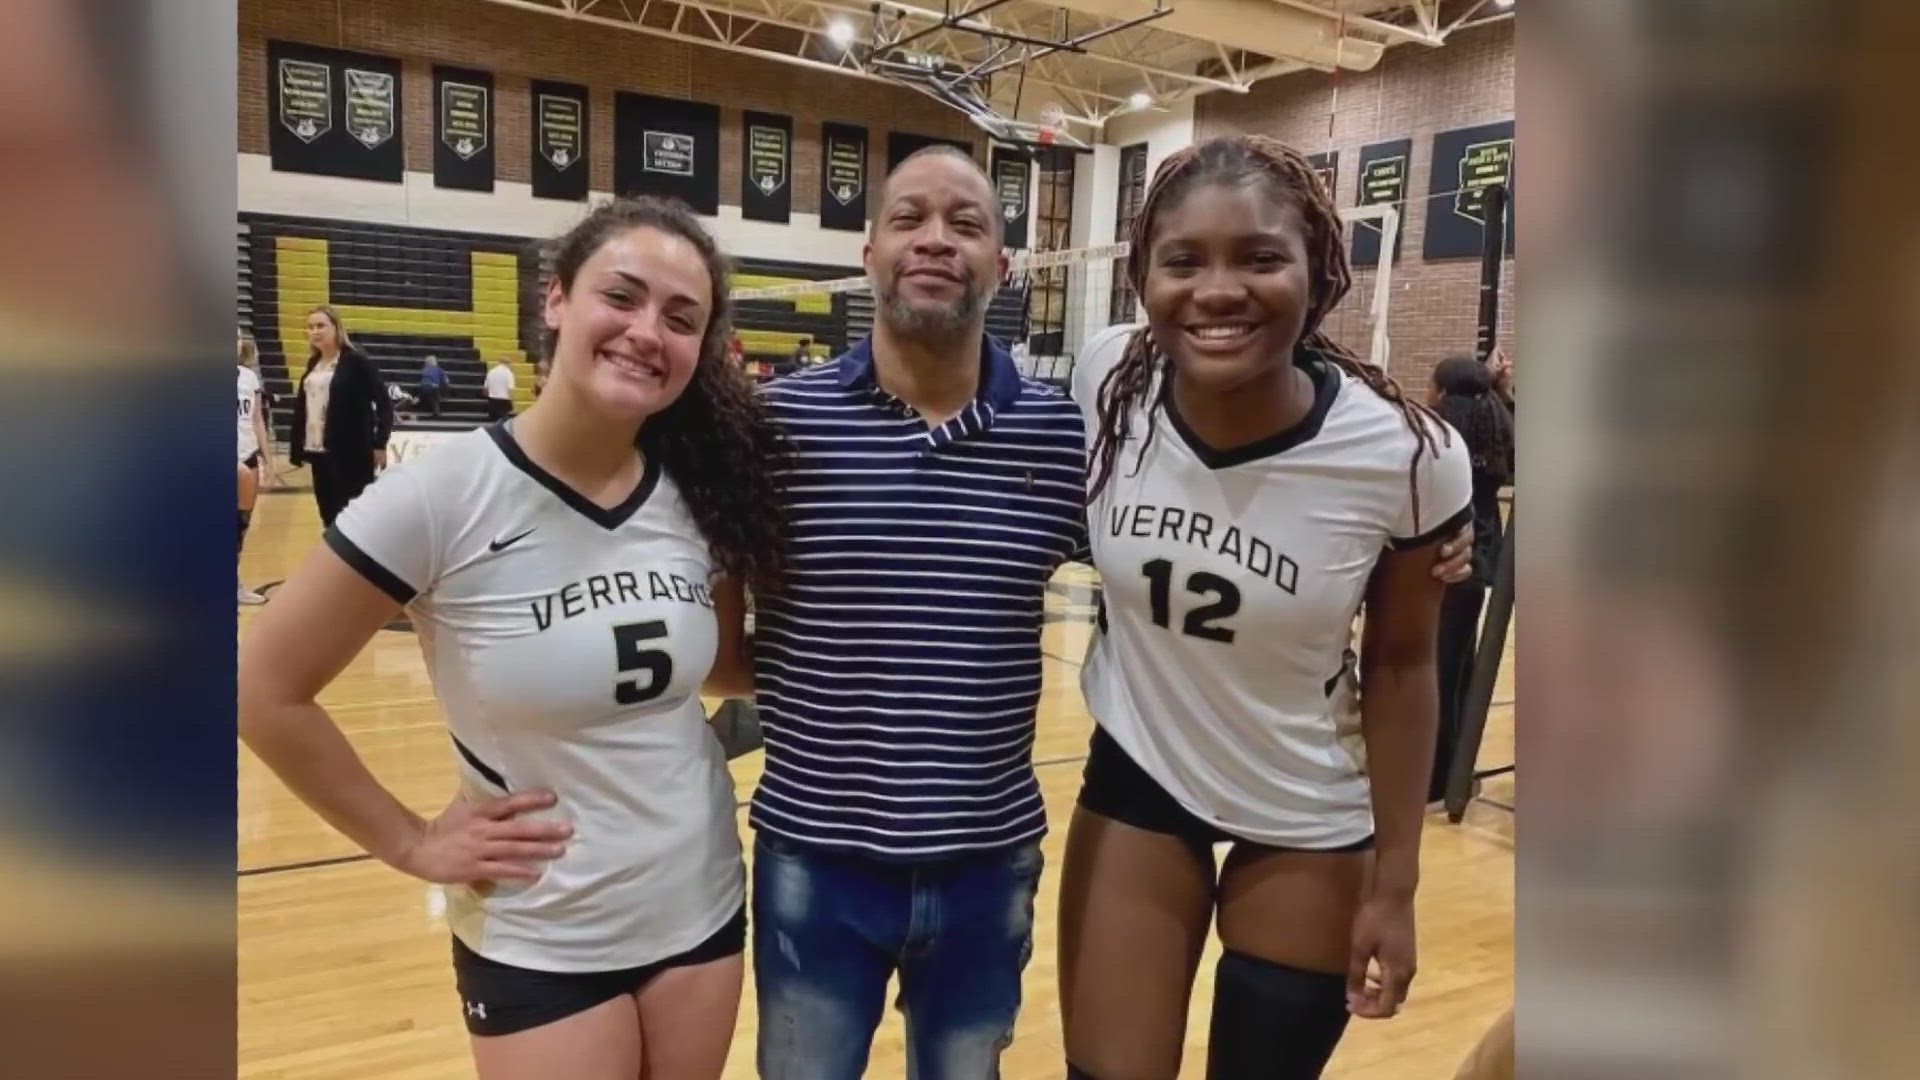 Journey Tucker will officially celebrate Monday and announce her commitment to play volleyball for the University of Arizona after surviving a rare brain tumor.